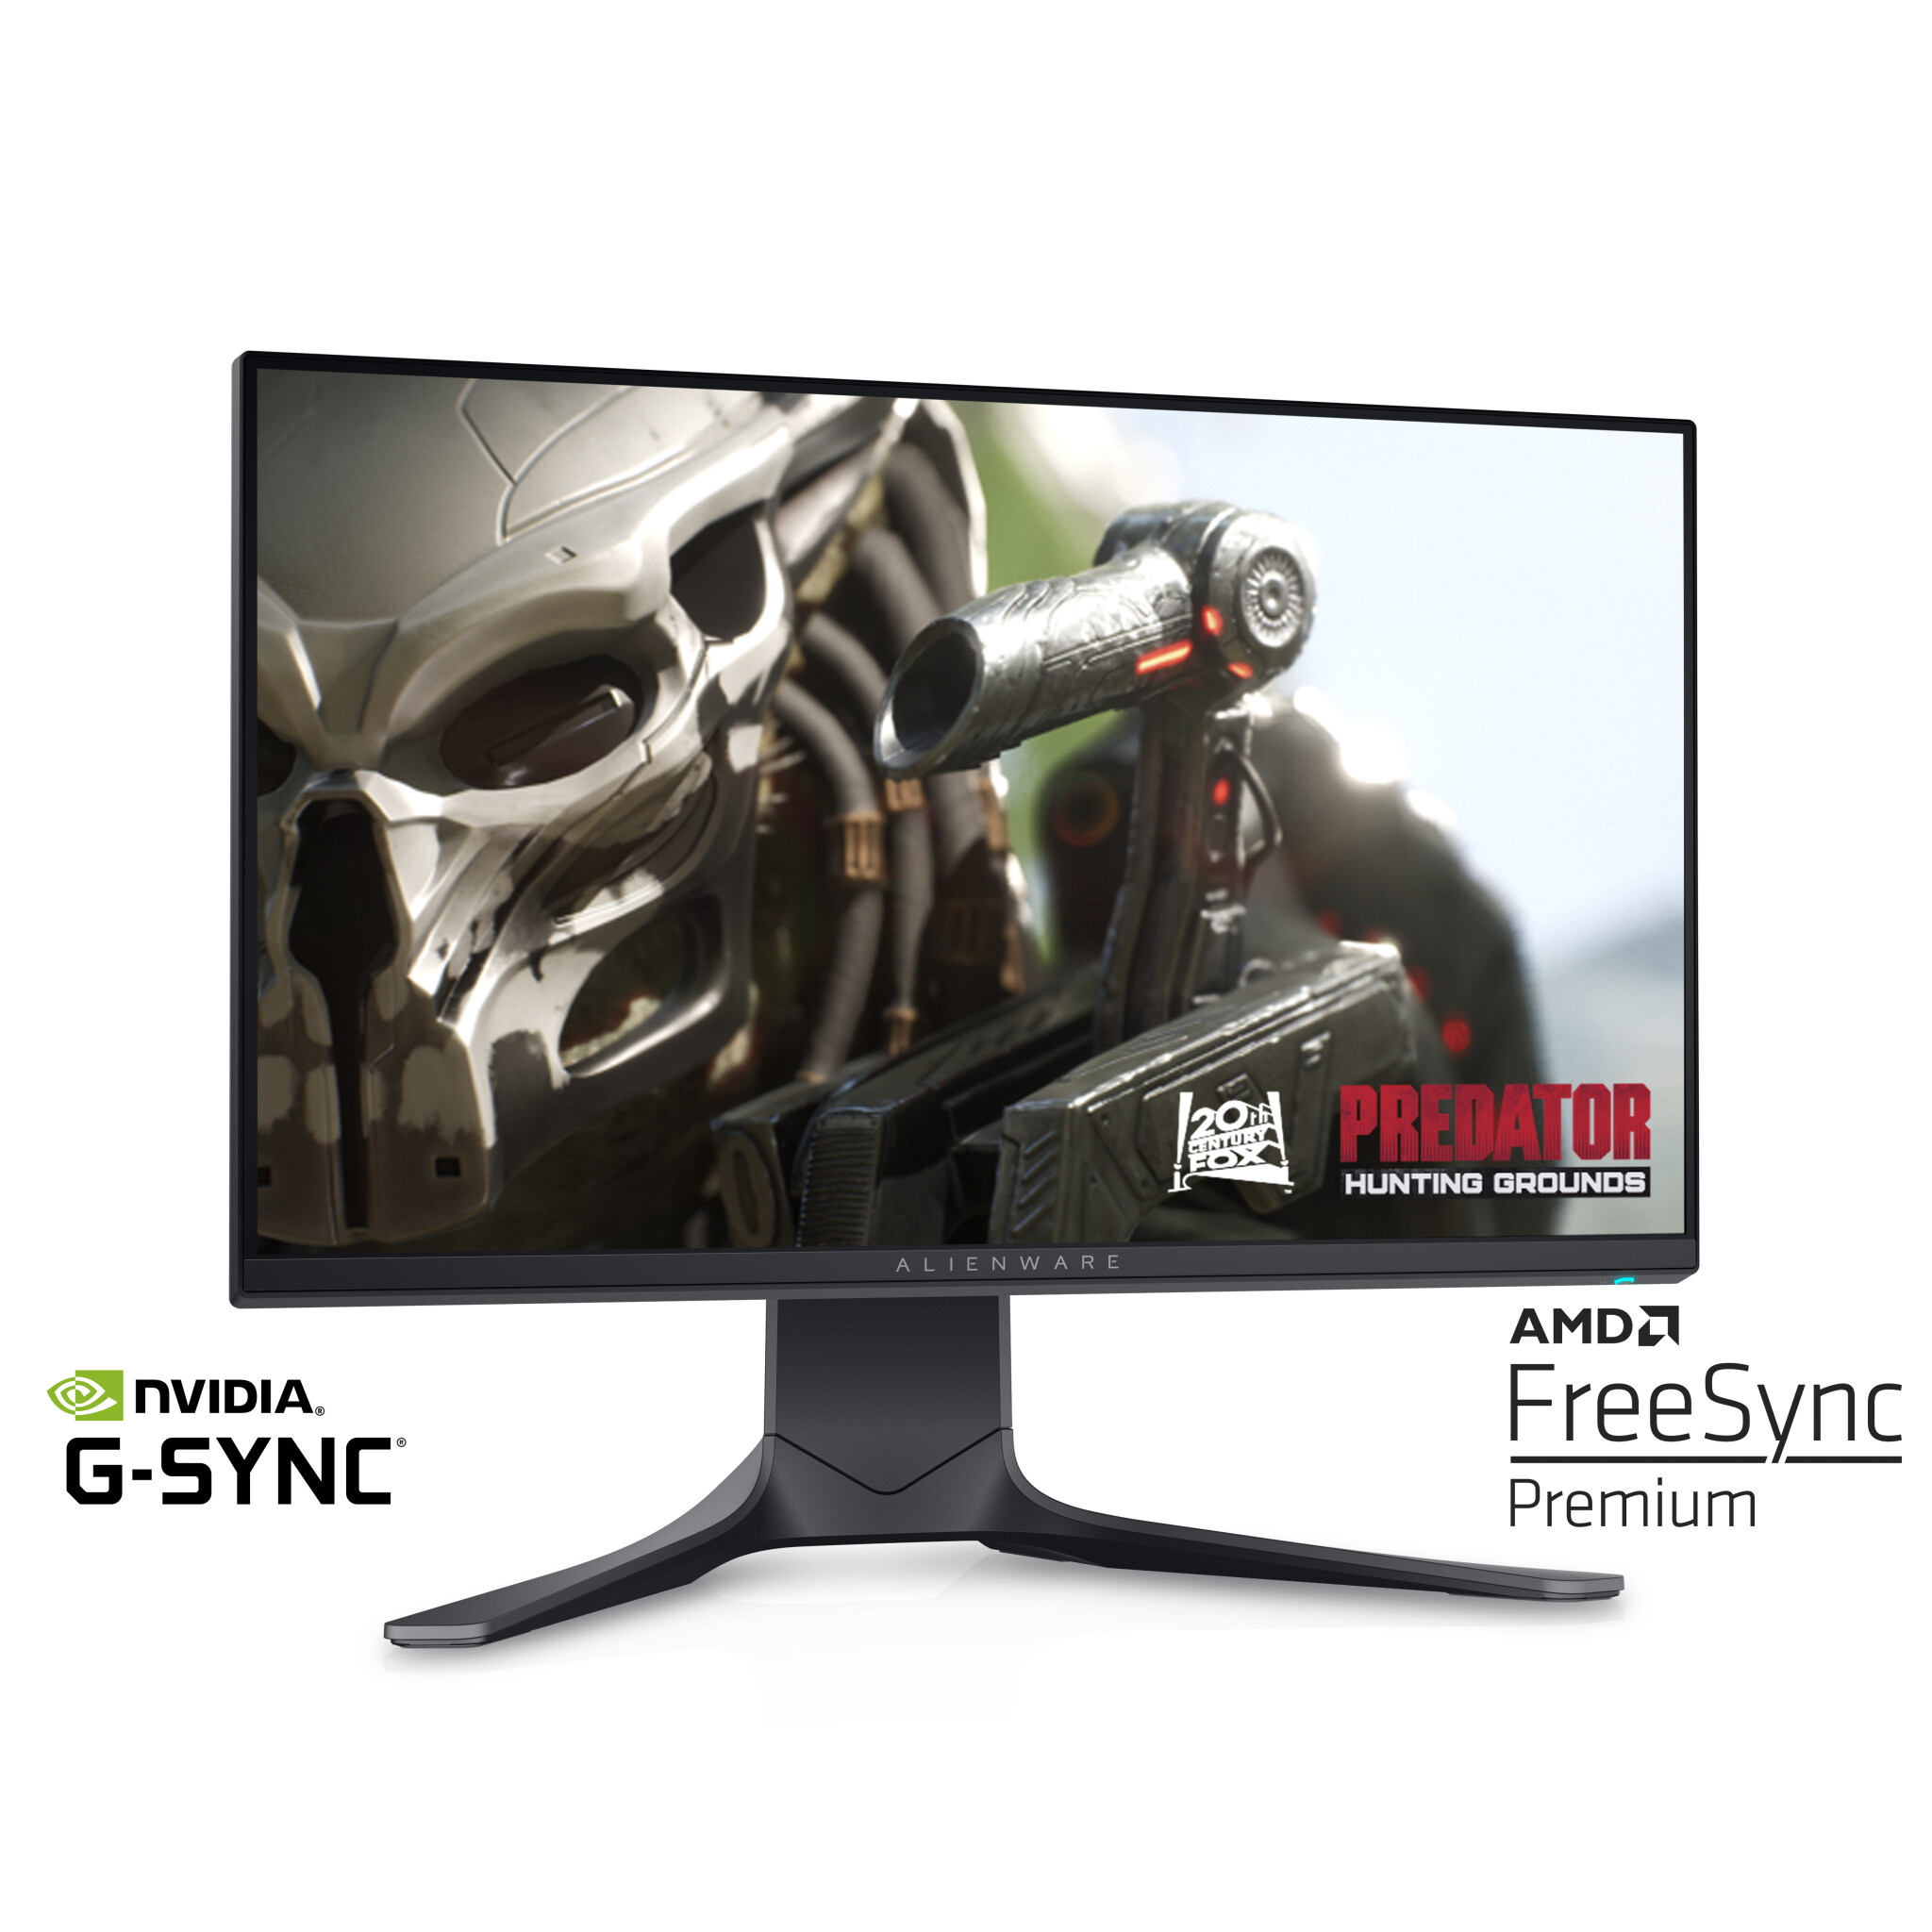 Alienware 25 Inch Gaming Monitor - AW2521HF : External Computer 